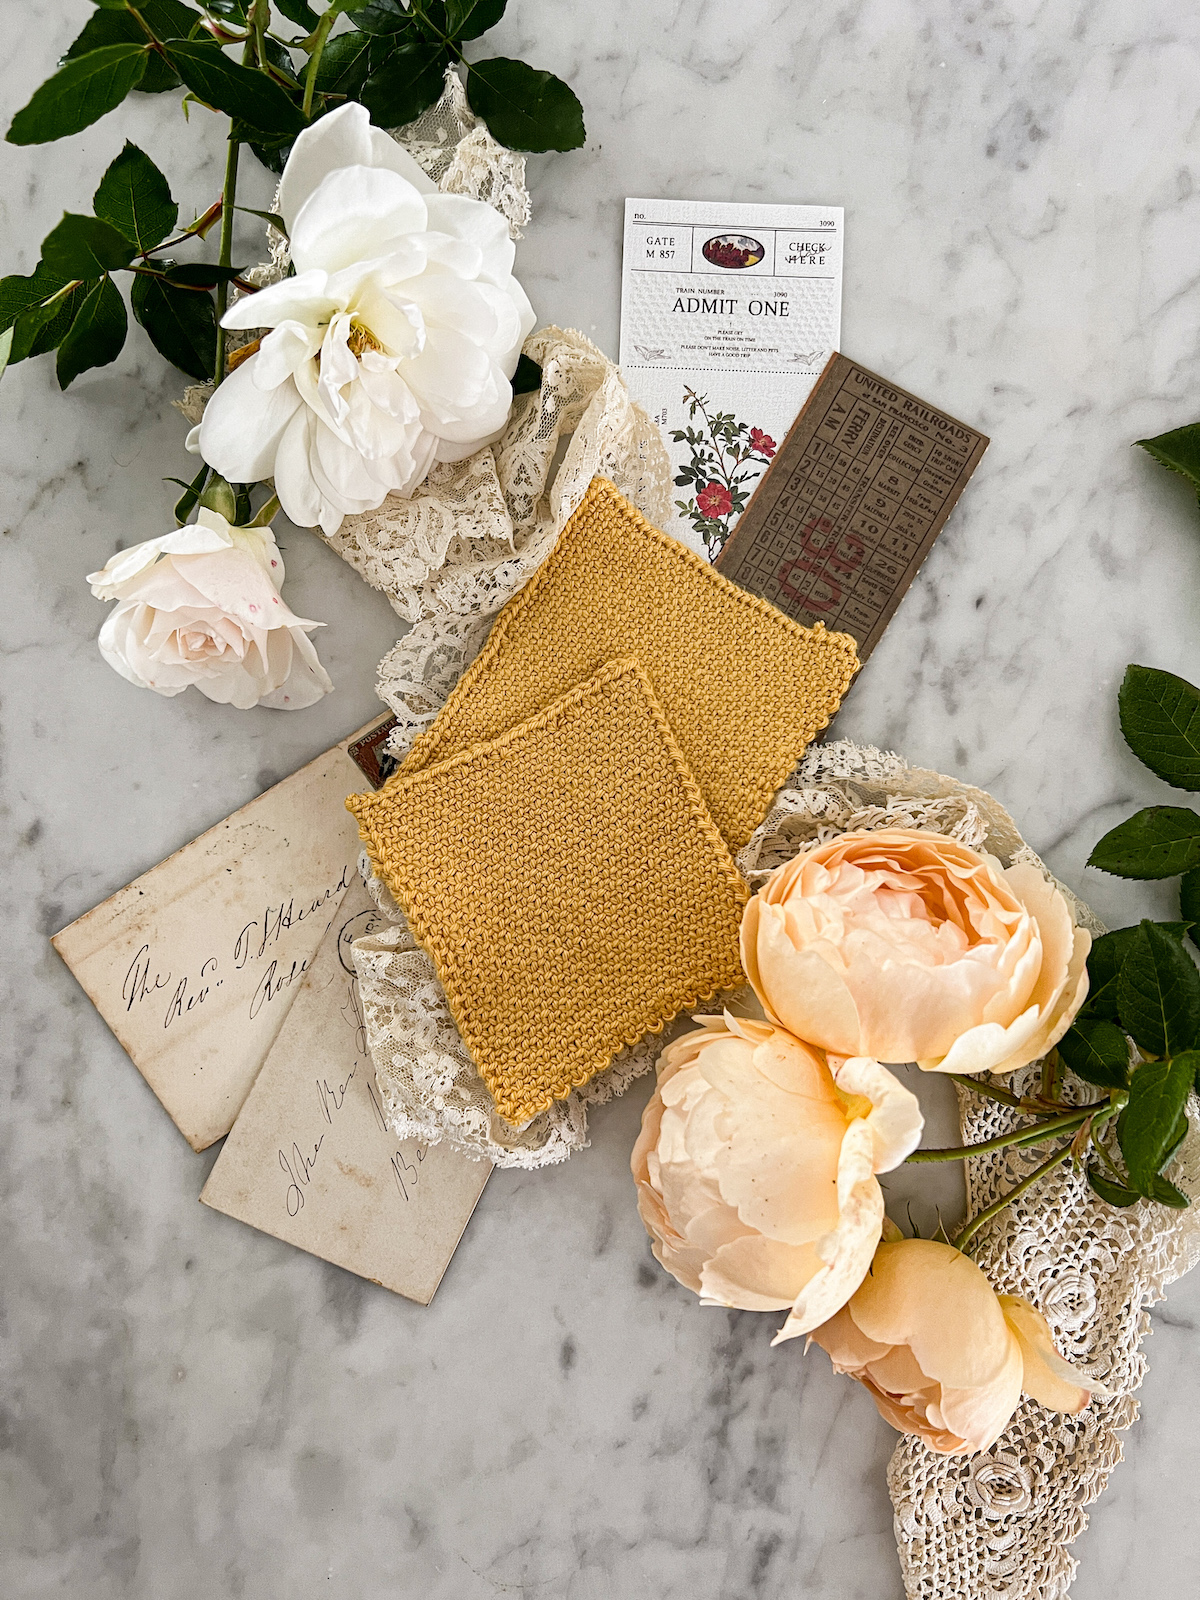 A flatlay photograph showing two yellow knit swatches photographed from the top down. Both are knit in linen stitch. The top swatch was knit with larger needles and therefore has a looser gauge. They're surrounded by white and peach roses, antique lace, and paper ephemera.